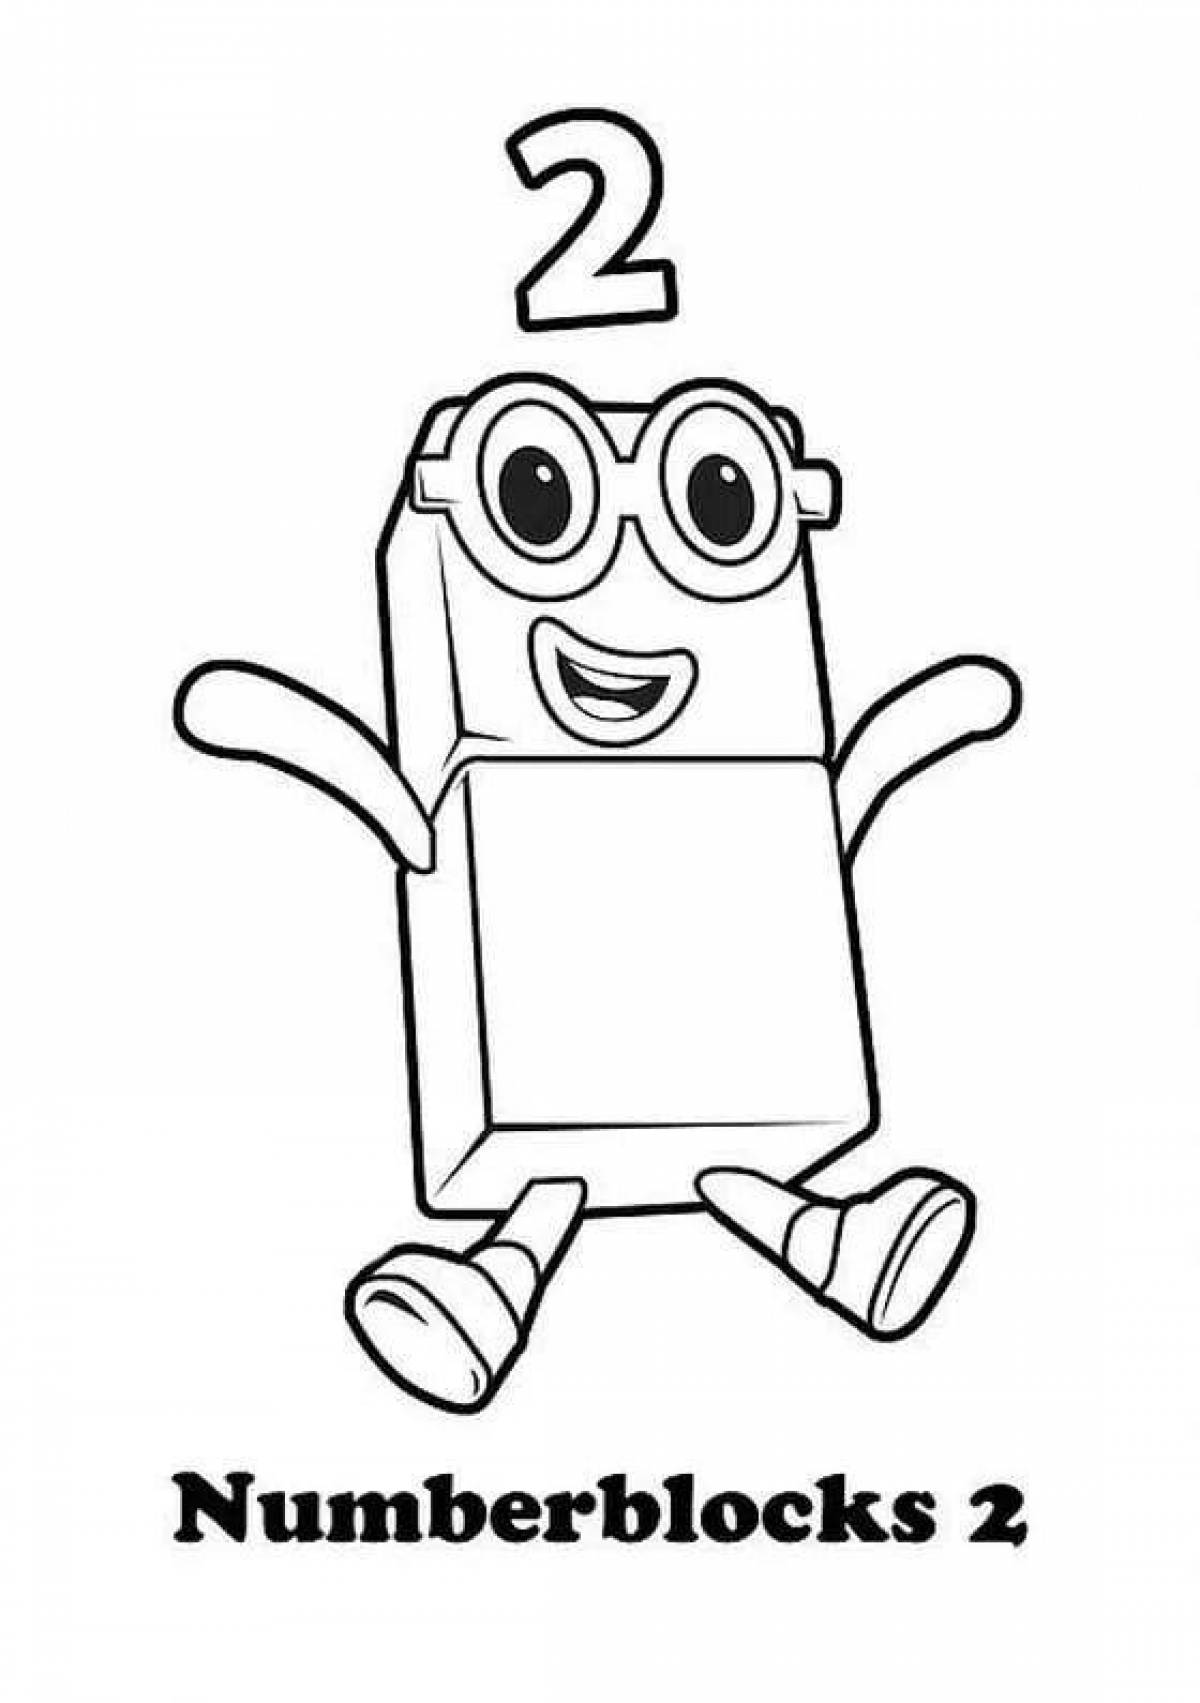 Coloring-imagination number blocks coloring page